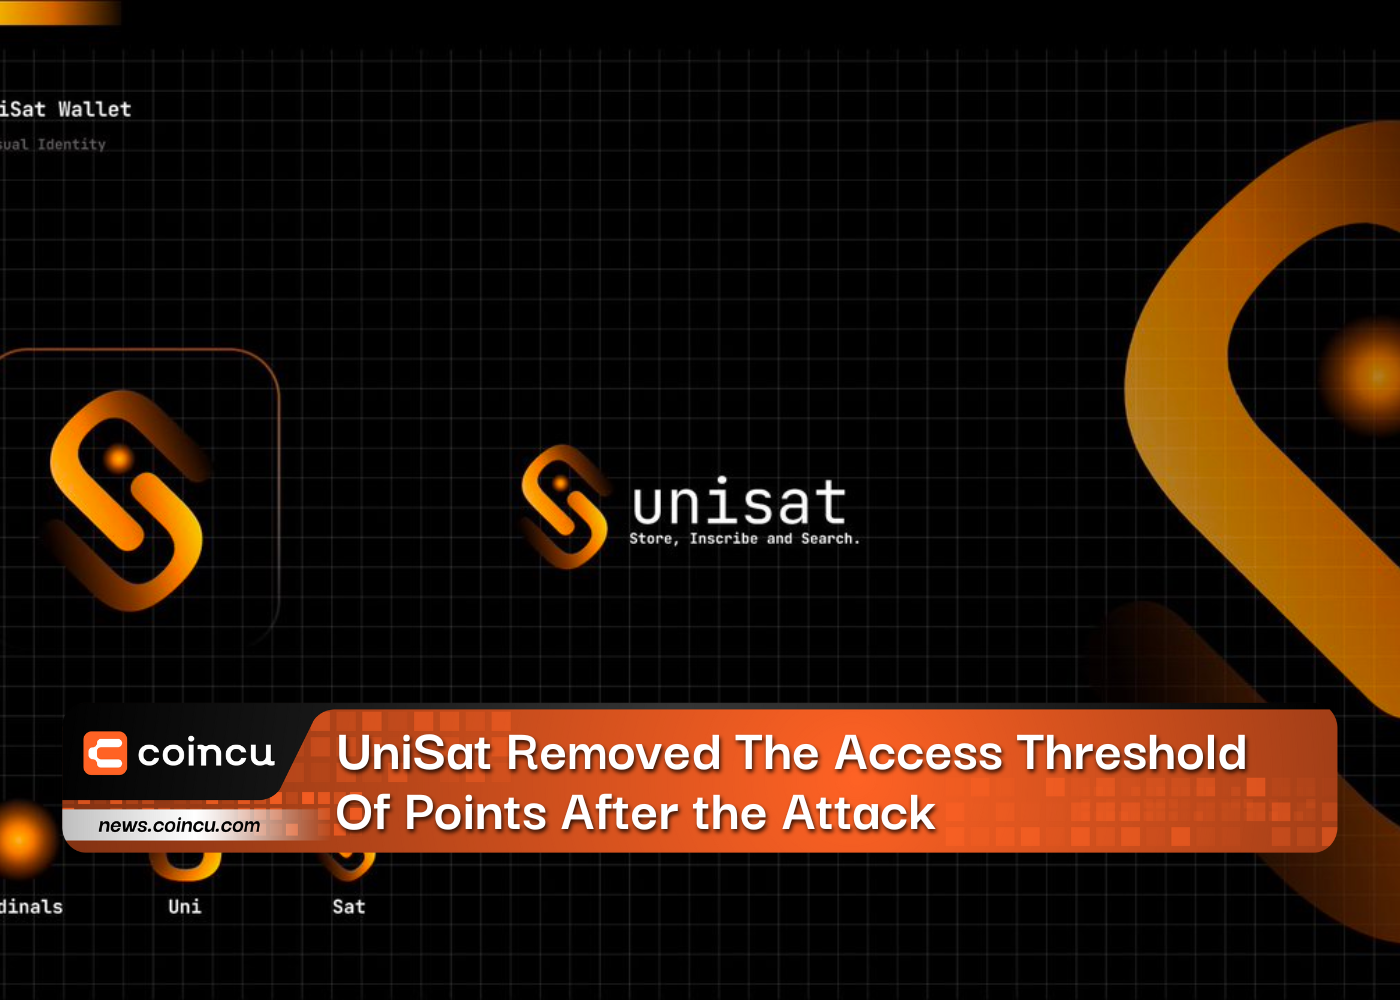 UniSat Removed The Access Threshold Of Points After the Attack